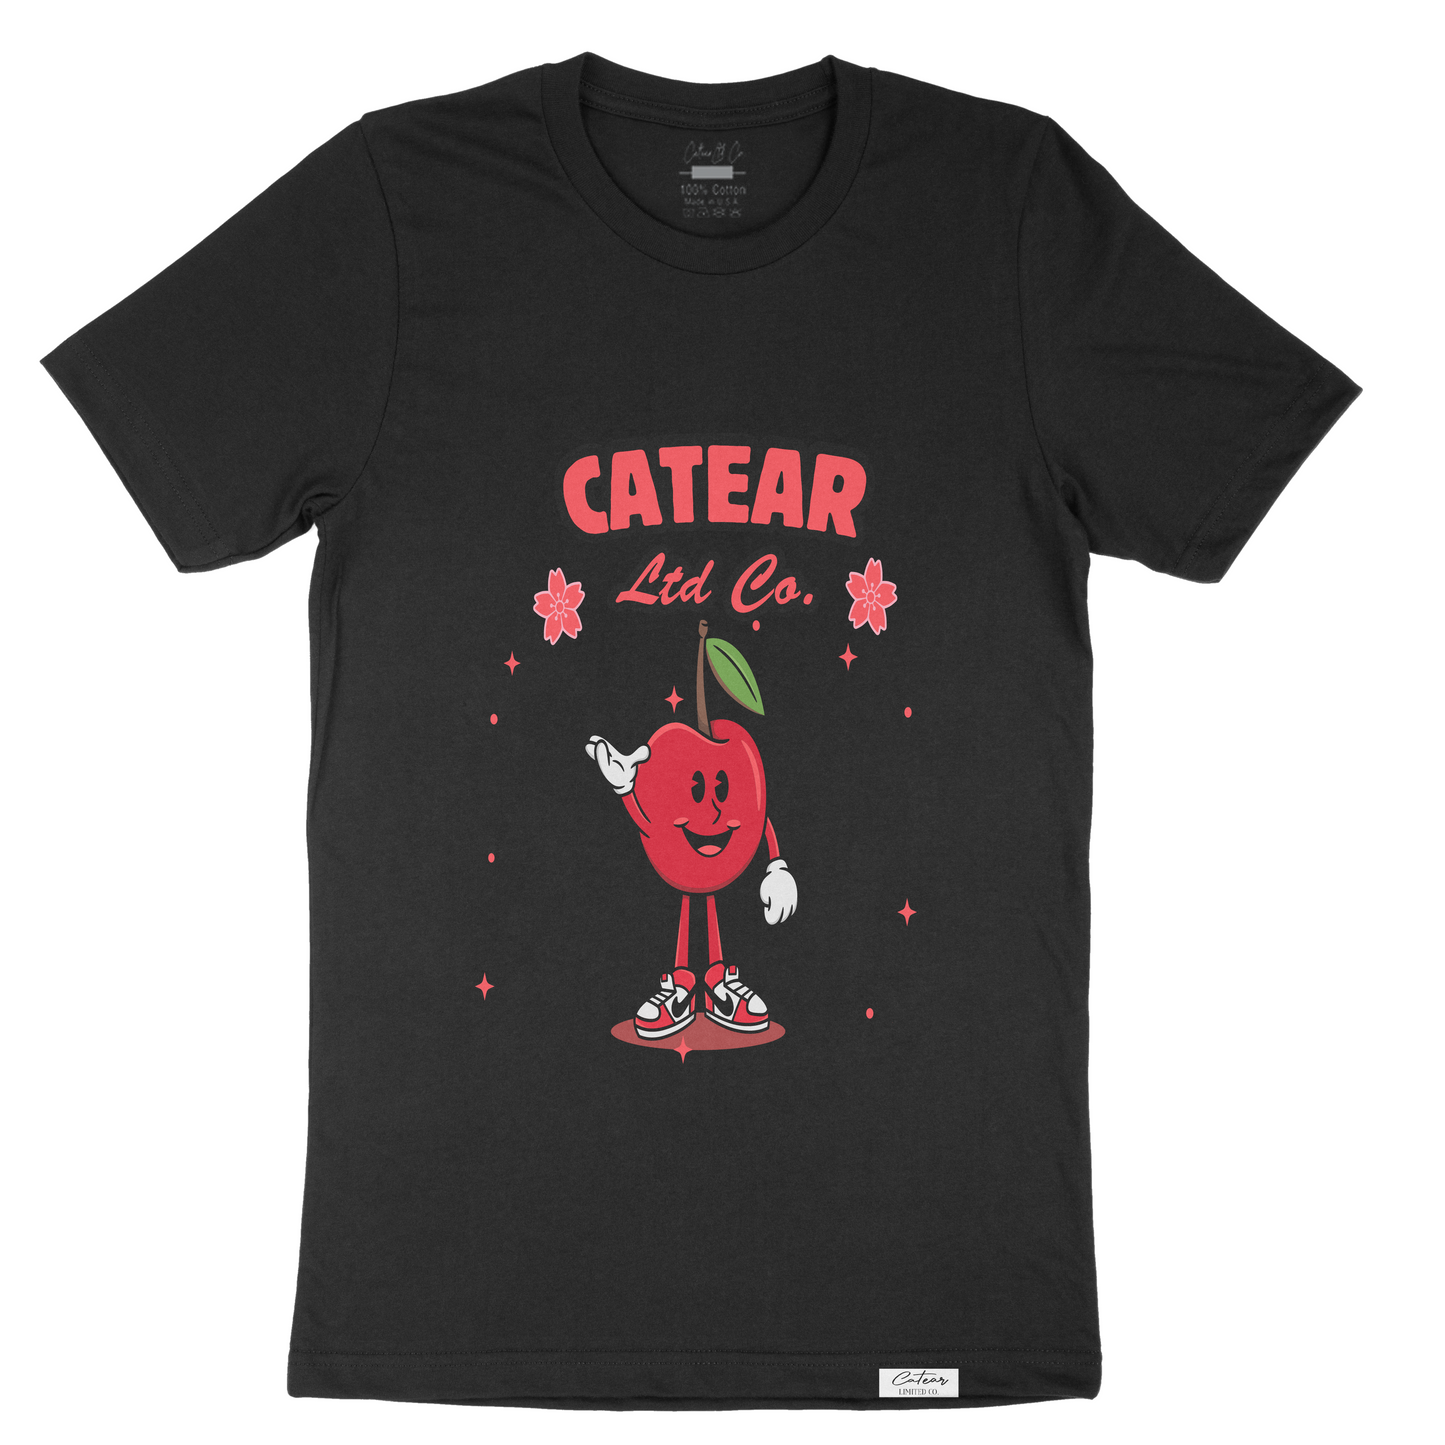 Unisex black color tee with hand-drawn cherry mascot screen printed on the front, woven label on bottom left 100% Cotton. Relaxed fit & great feel.